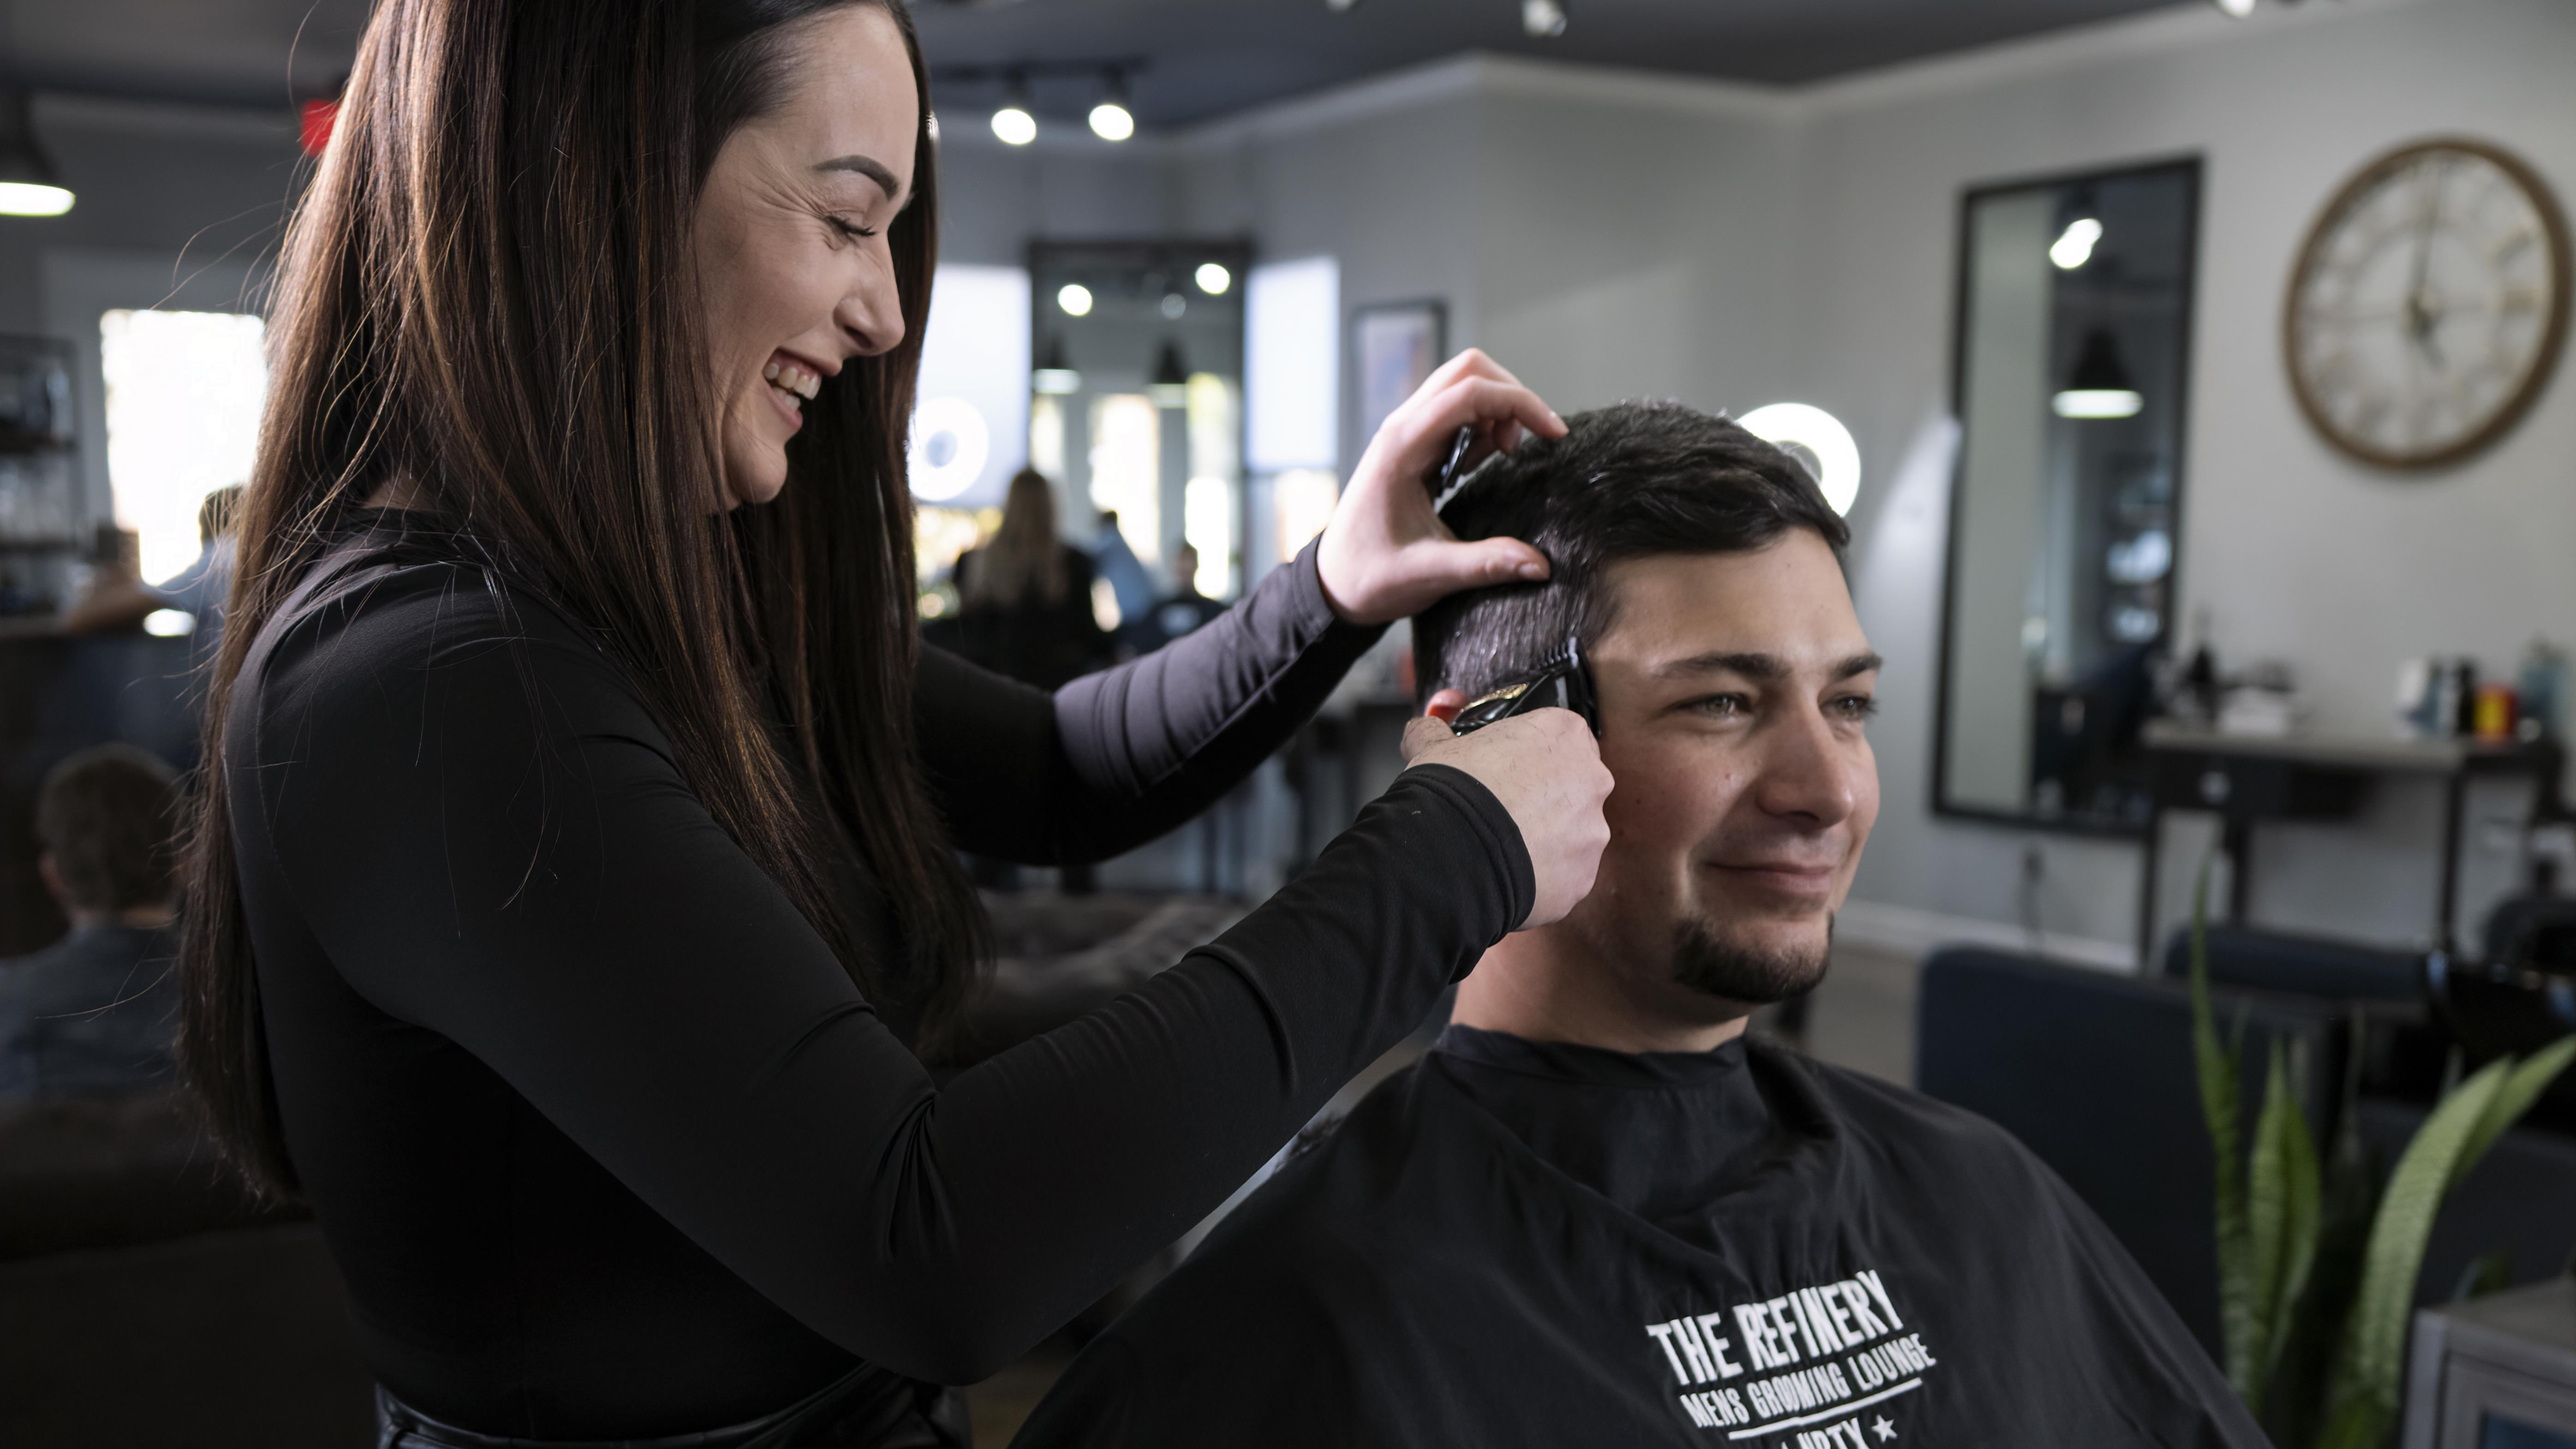 The Refinery Men's Grooming Lo/Hair Salons                                                                                                                                                                                             